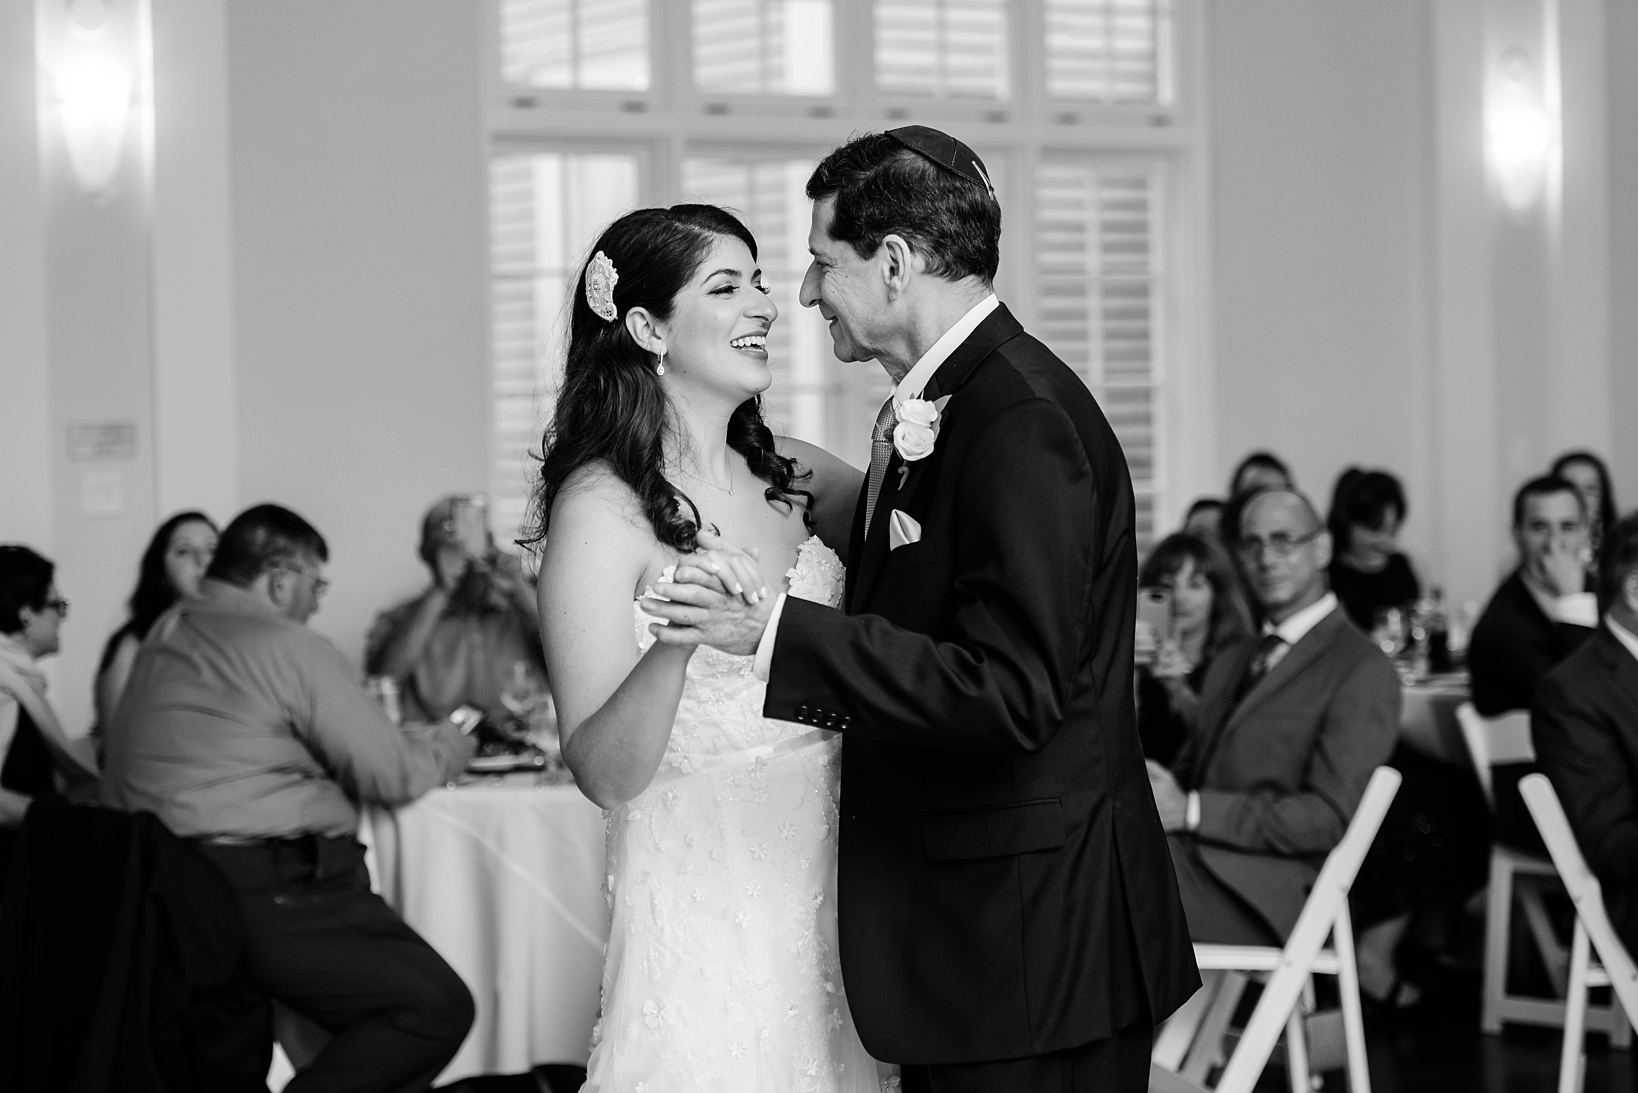 Father/ Daughter dance in black and white